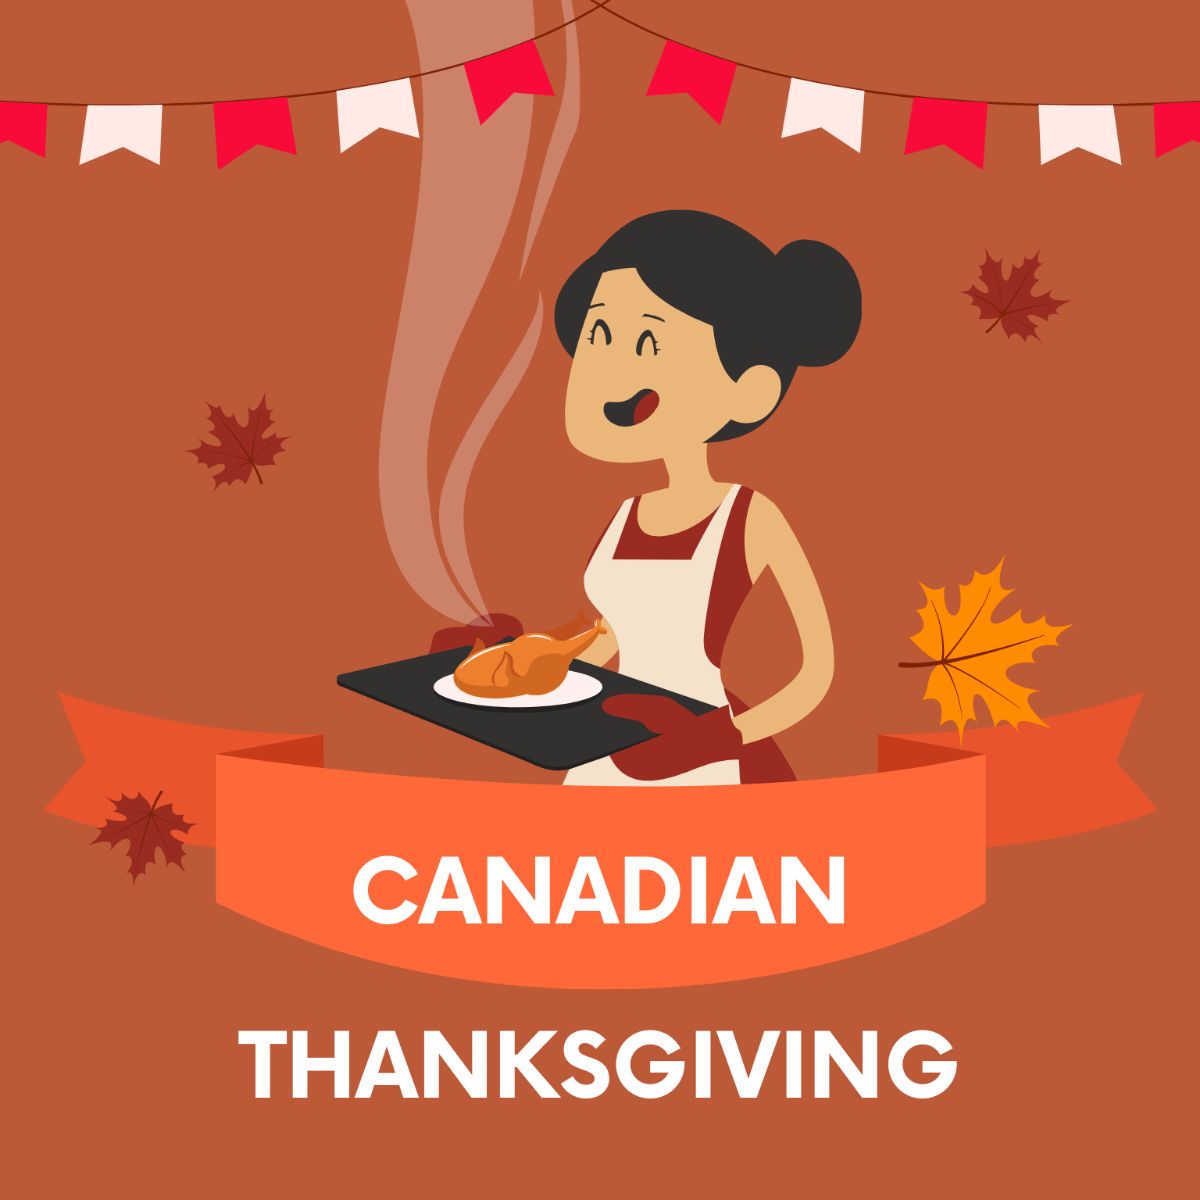 Canadian Thanksgiving Celebration Vector Template